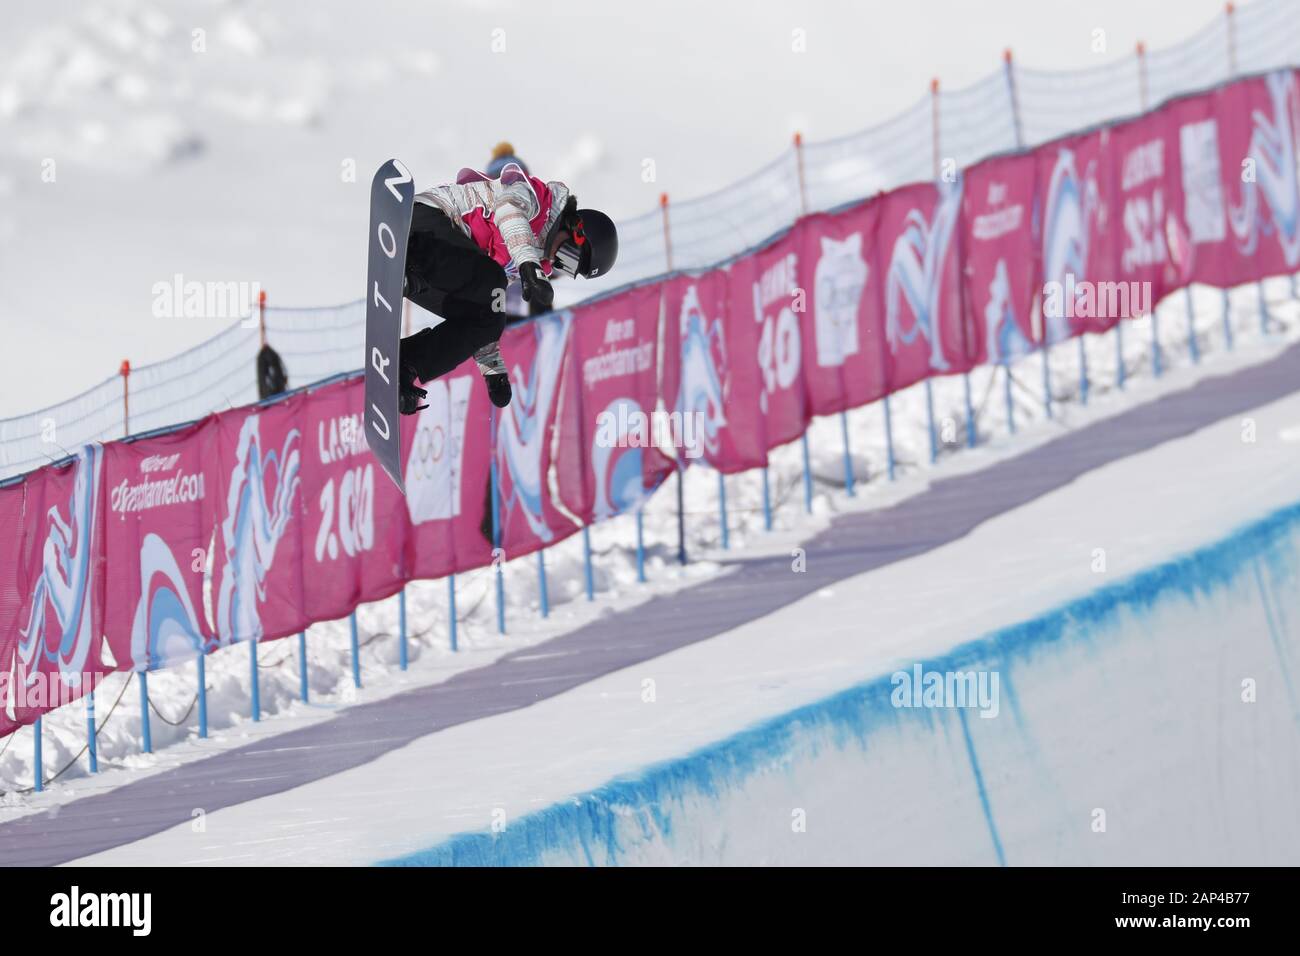 Leysin, Switzerland. 20th Jan, 2020. Japan's Mitsuki Ono competes during the 3rd Winter Youth Olympic Games Lausanne 2020 Snowboard Women's Halfpipe Final at Leysin Park & Pipe in Leysin, Switzerland, January 20, 2020. Credit: AFLO SPORT/Alamy Live News Stock Photo